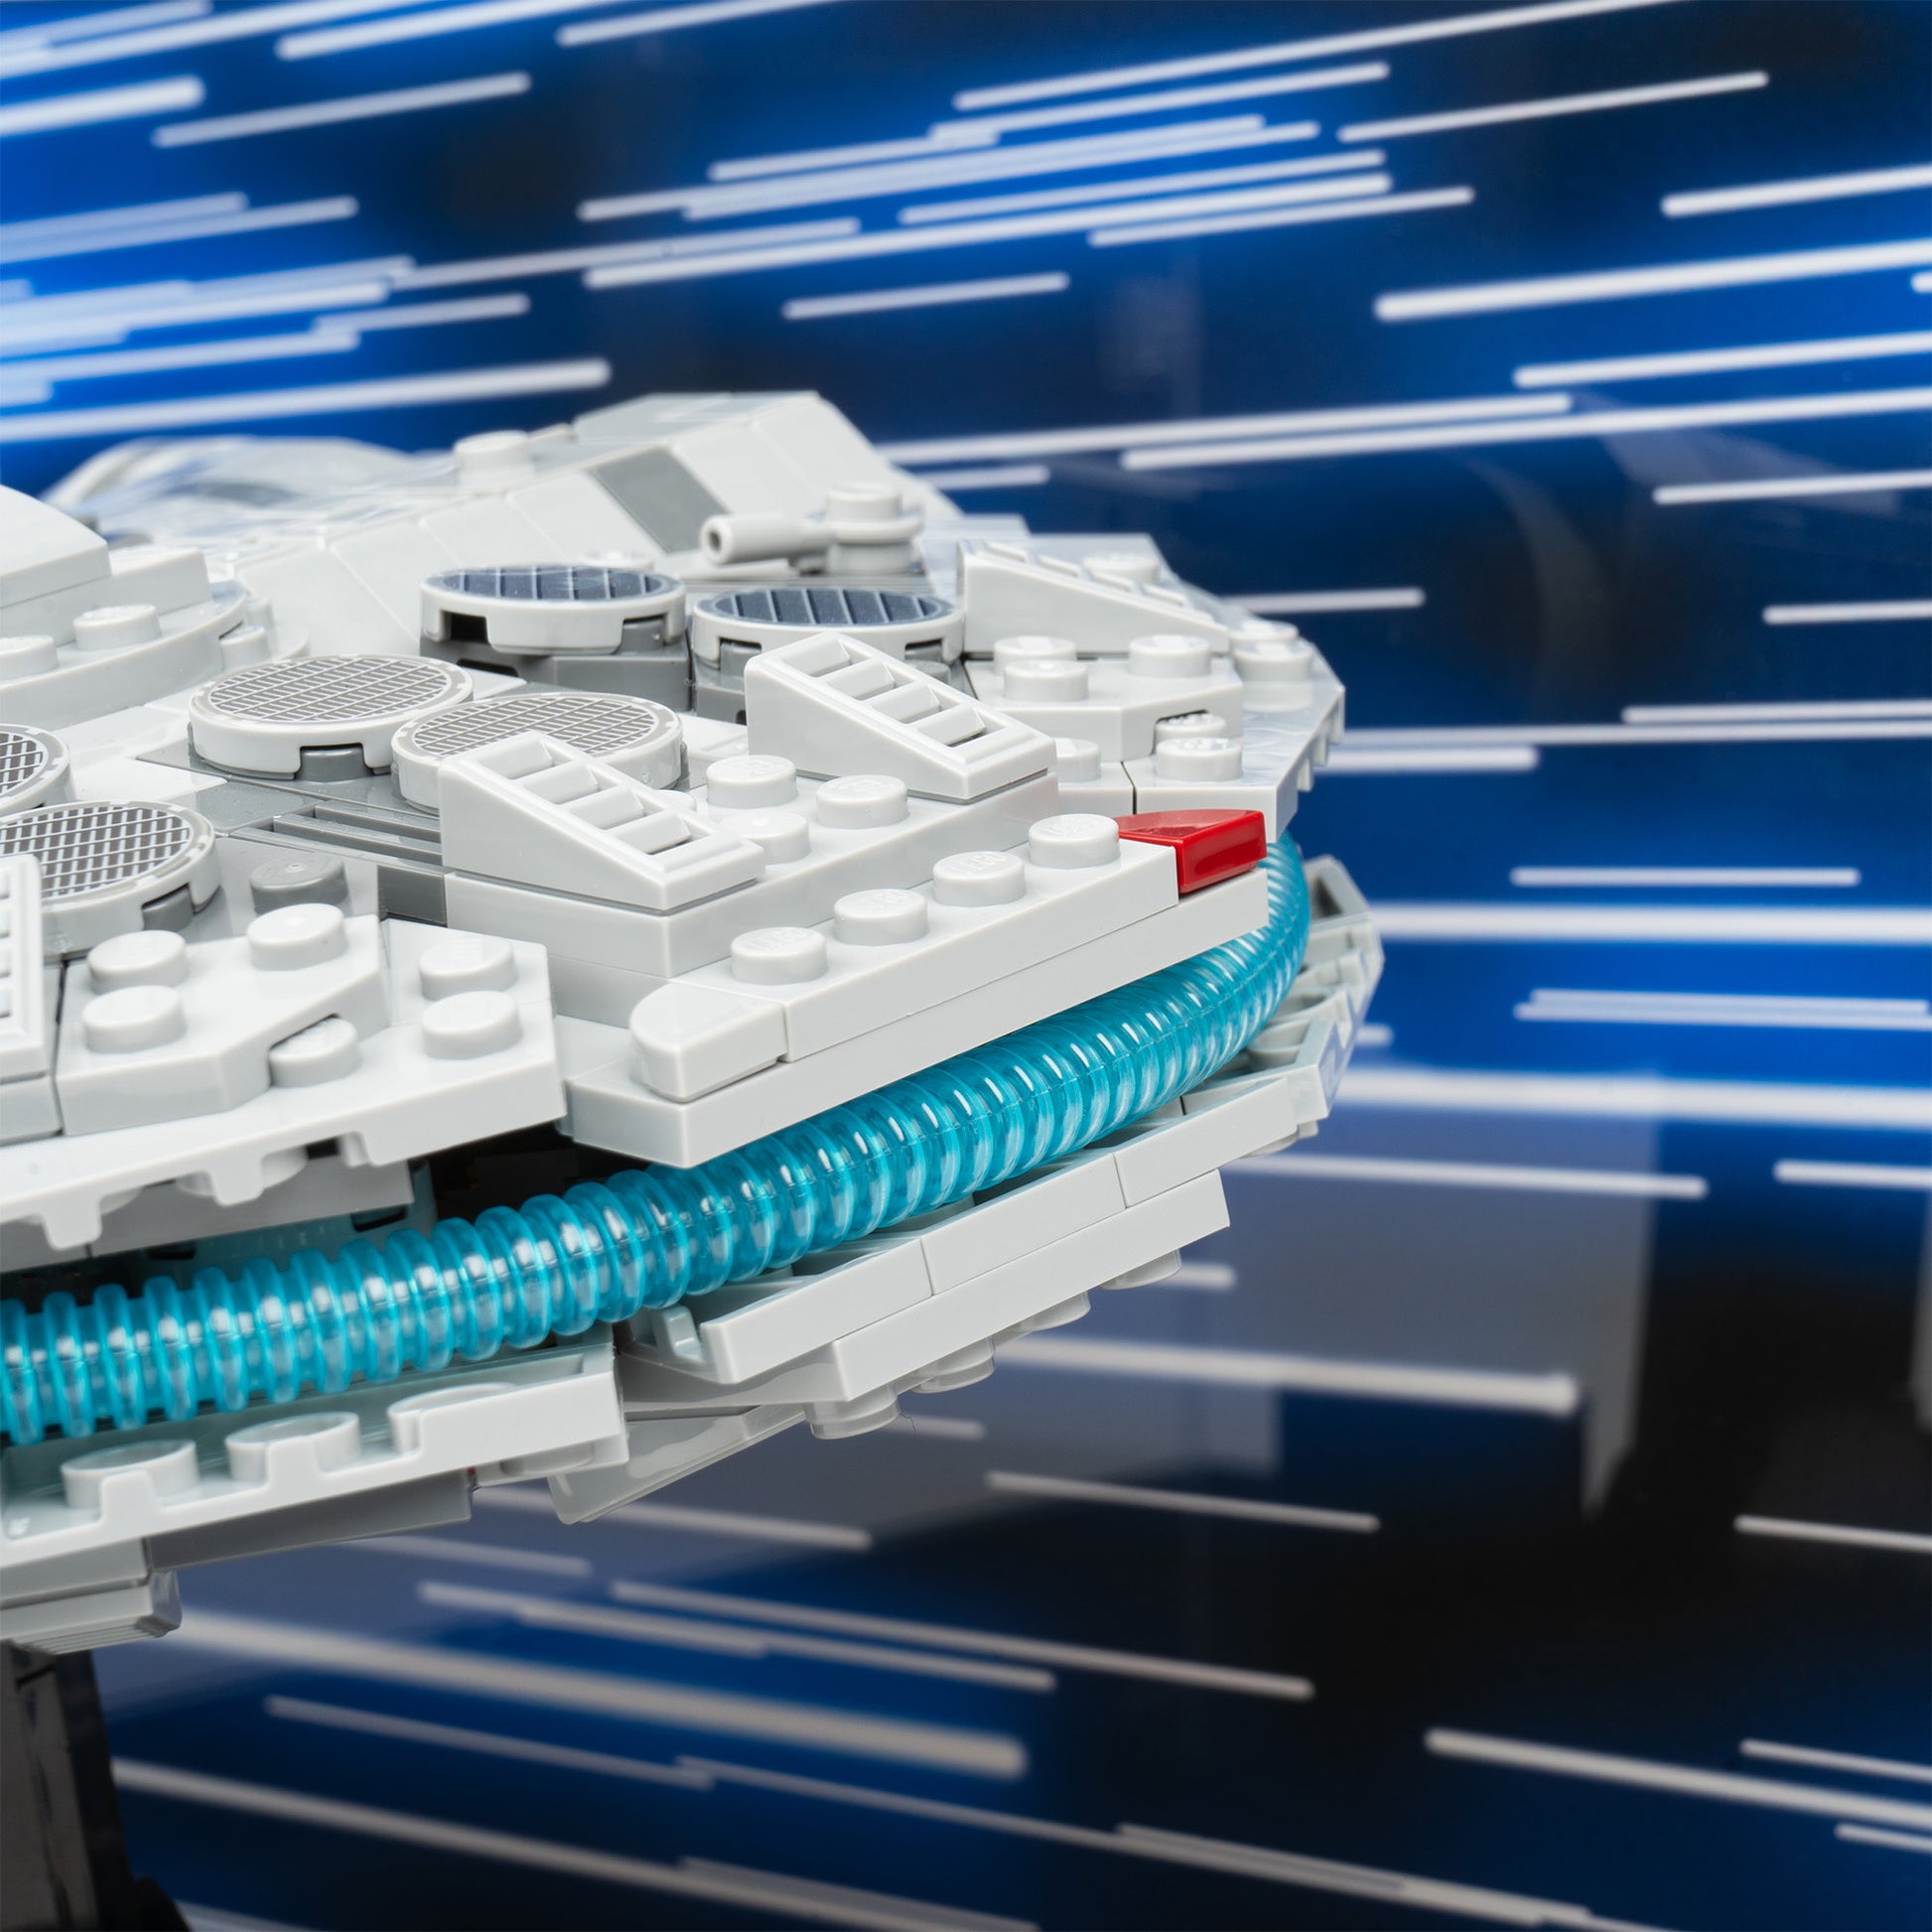 Engine detail view of LEGO 75375 Millennium Falcon Display Case with a UV printed background.Angled view of LEGO 75375 Millennium Falcon Display Case with a UV printed background.